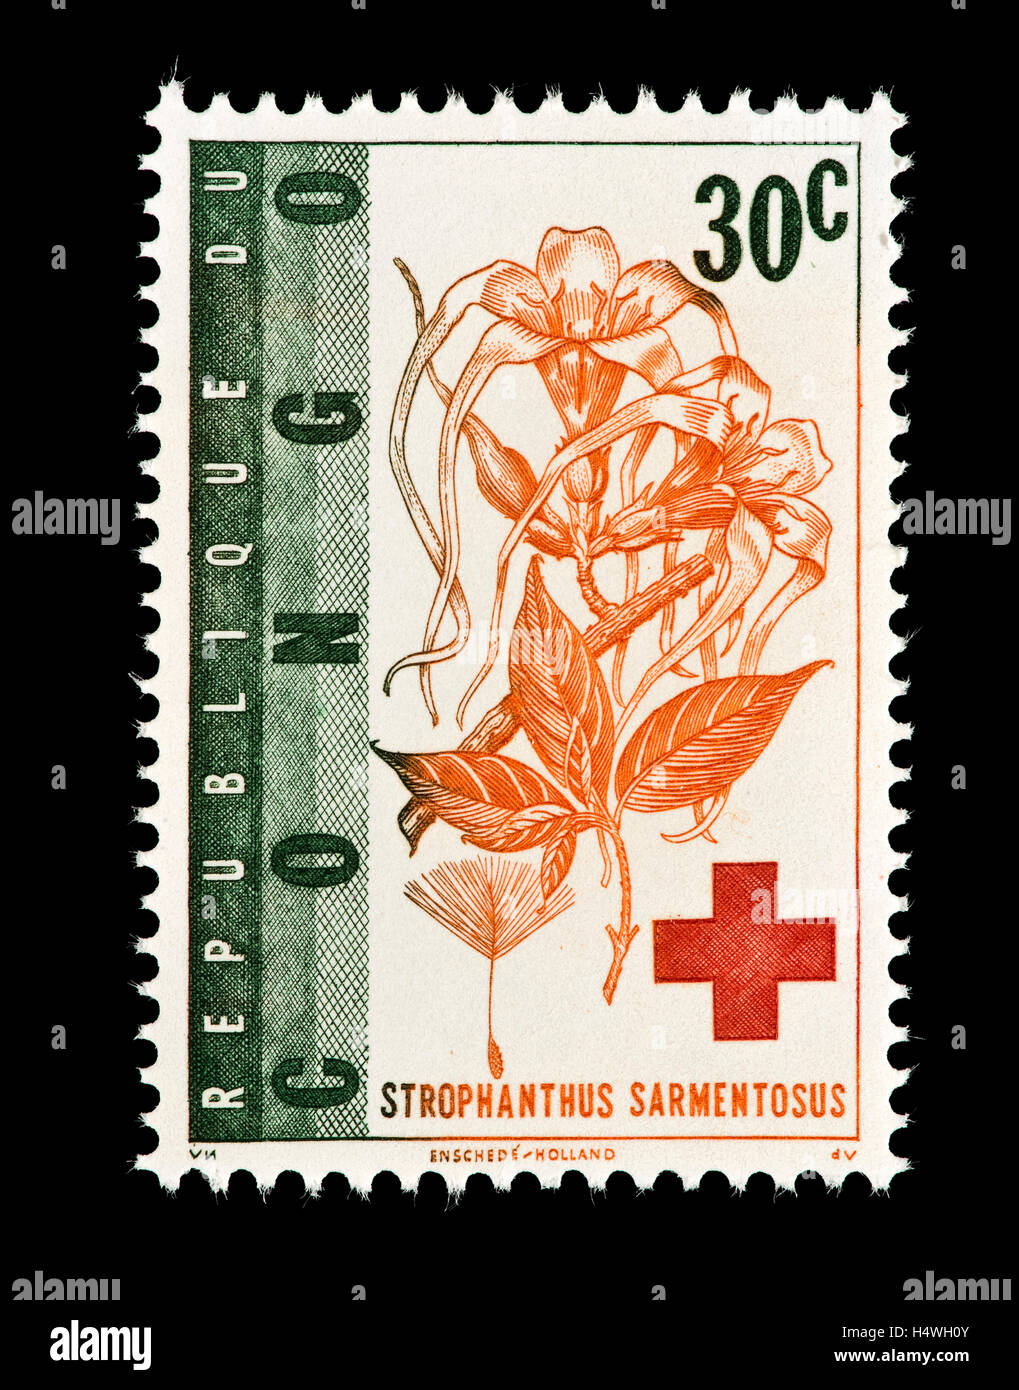 Postage stamp from Congo depicting Strophanthus sarmentosus, African medicinal plant. Stock Photo